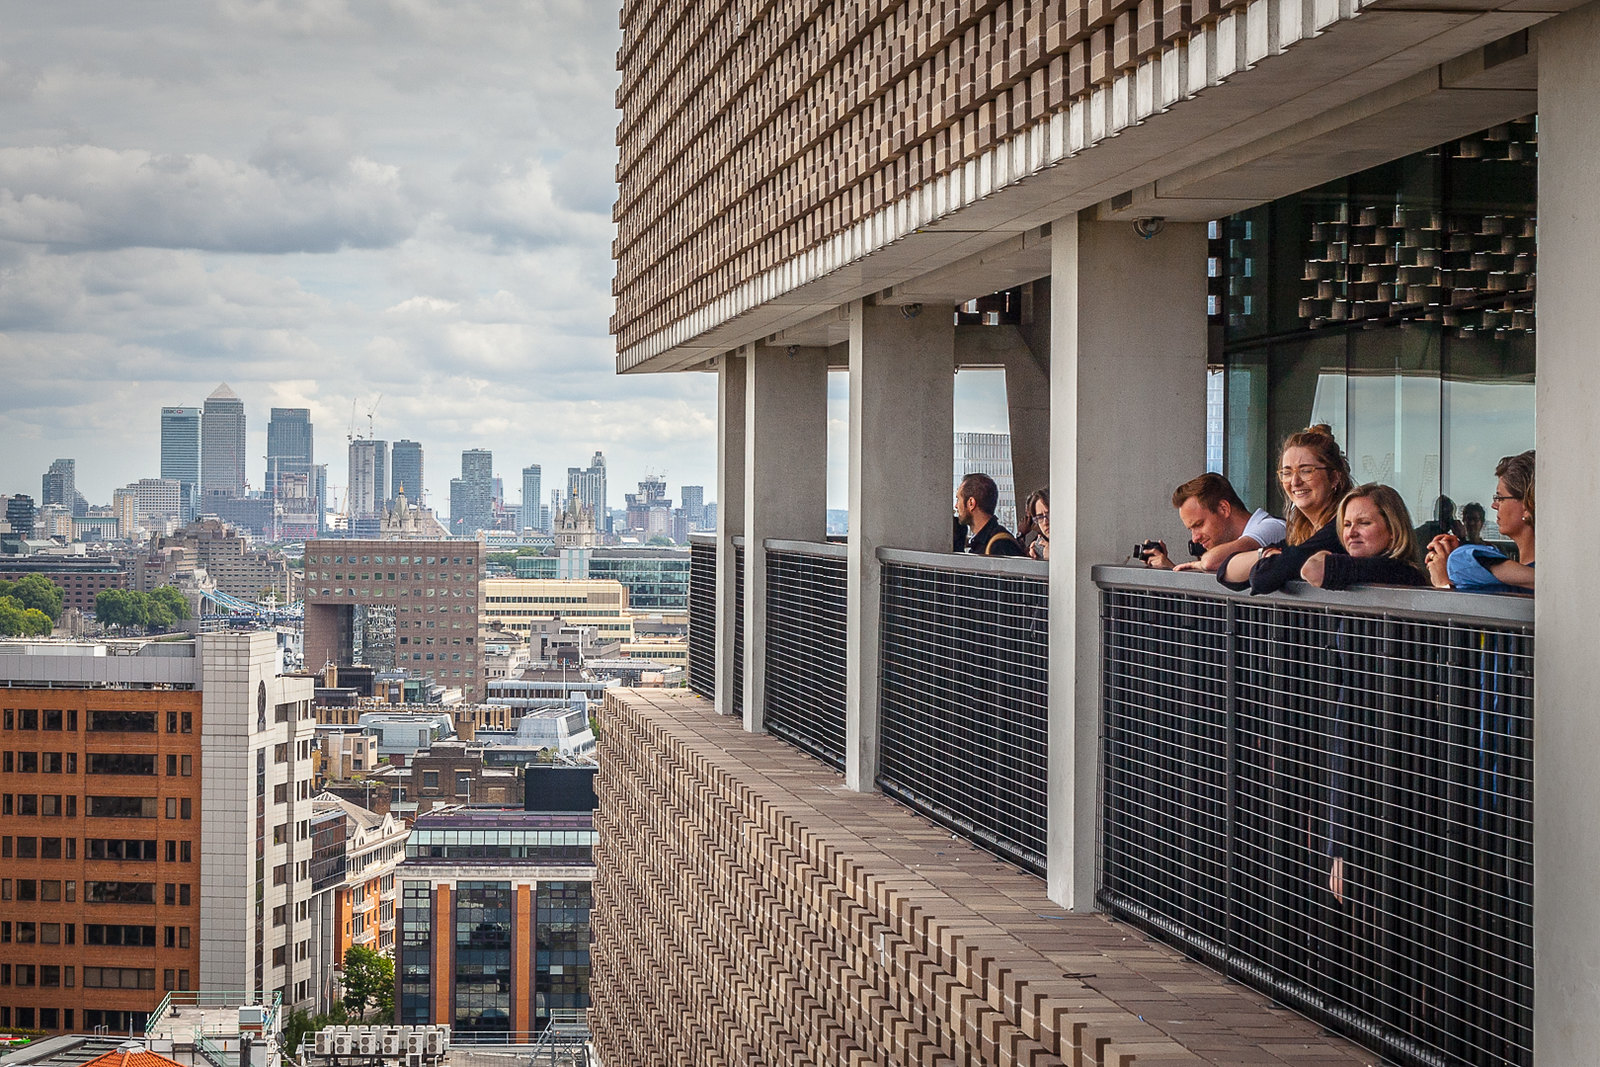 Balcony views at the Tate Modern in London, as people hang over the edge of a railing